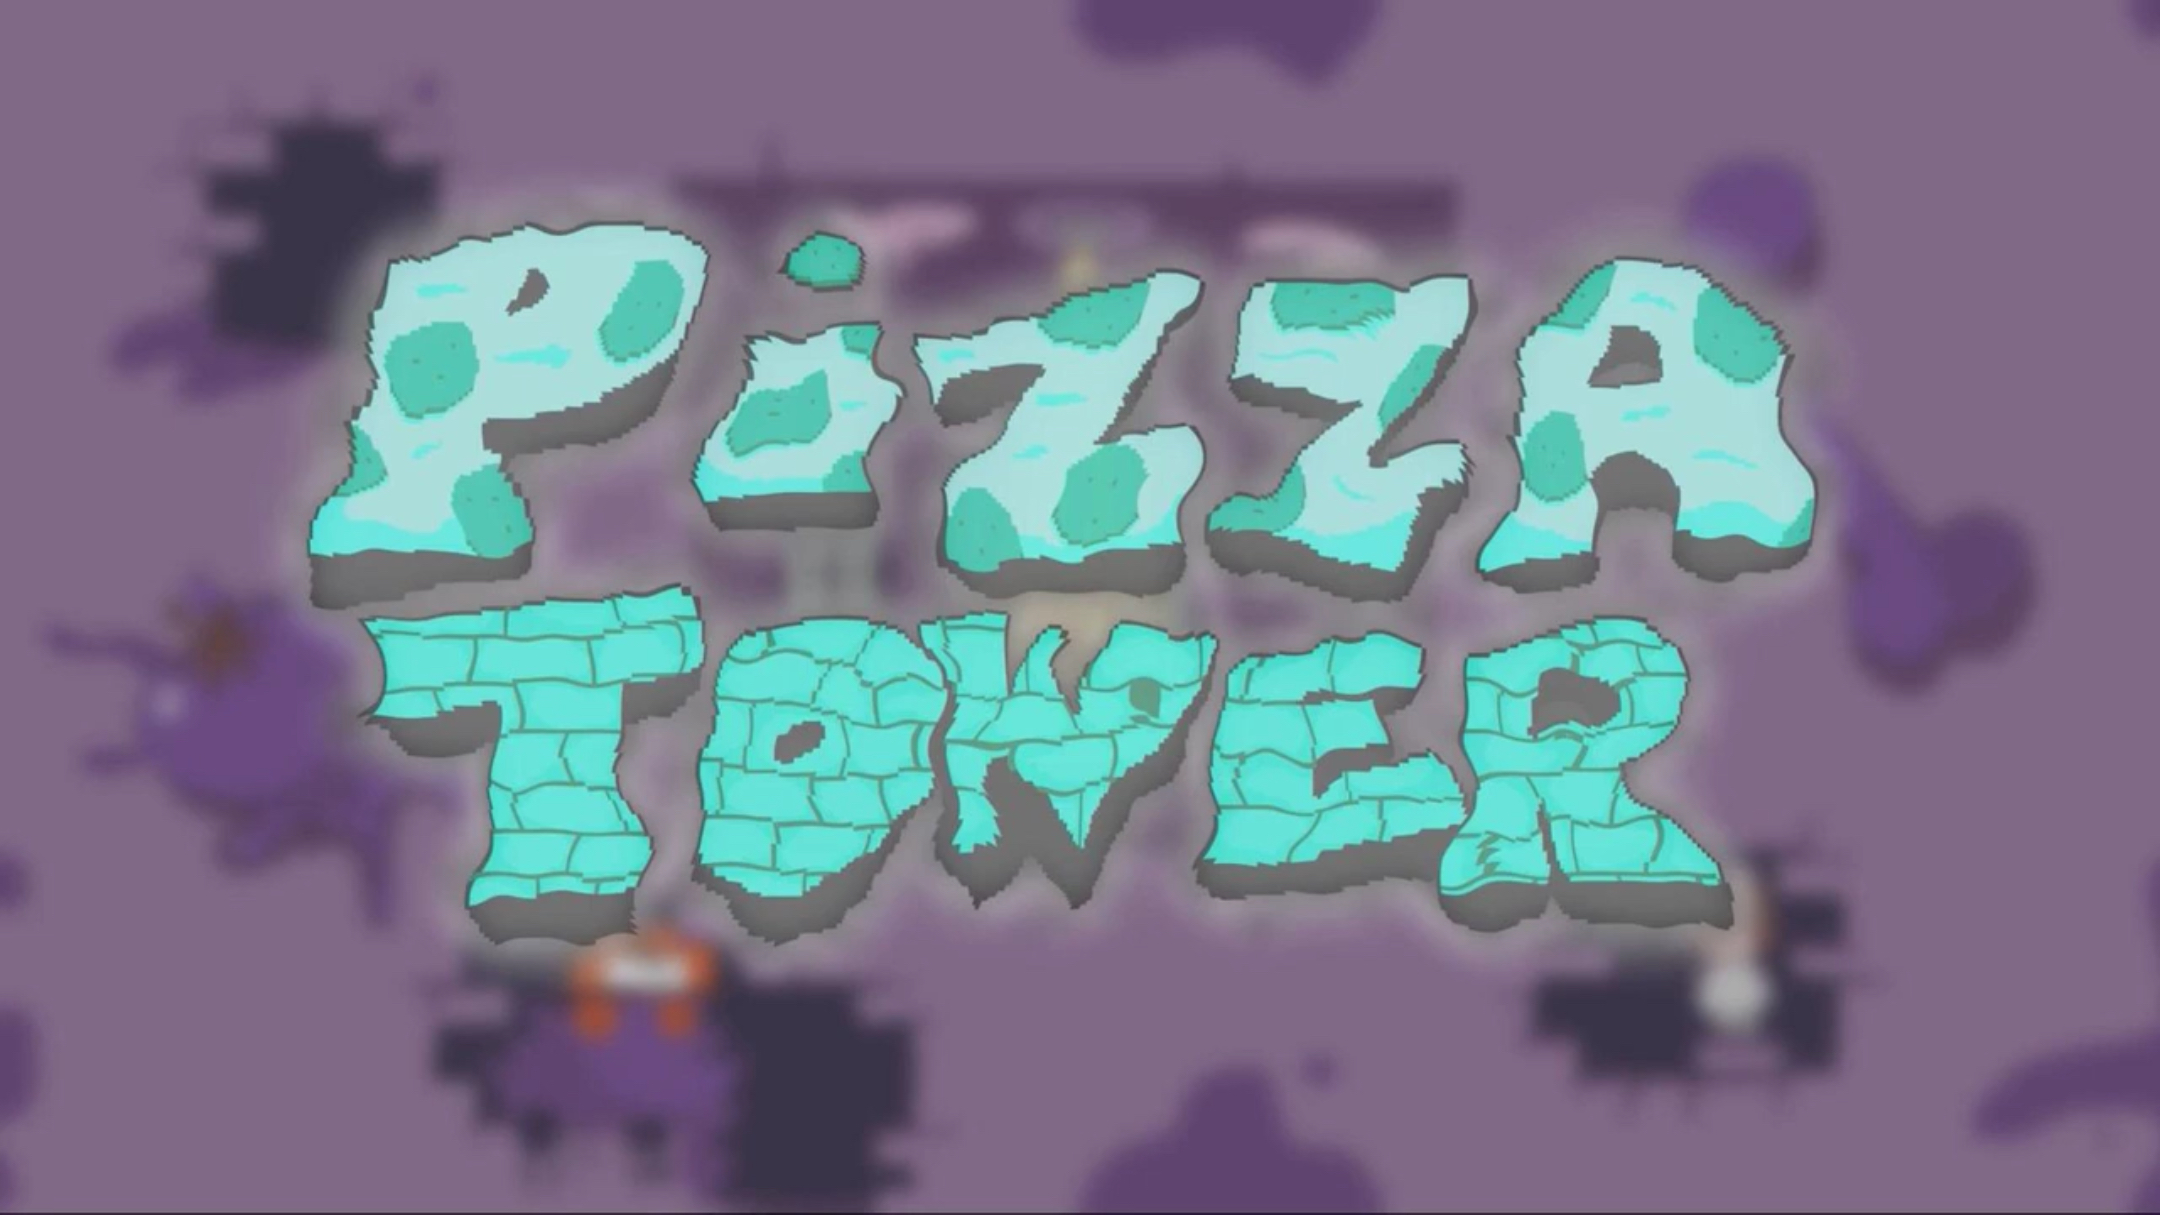 Peppino (Pizza Tower) [Super Smash Bros. Ultimate] [Mods]